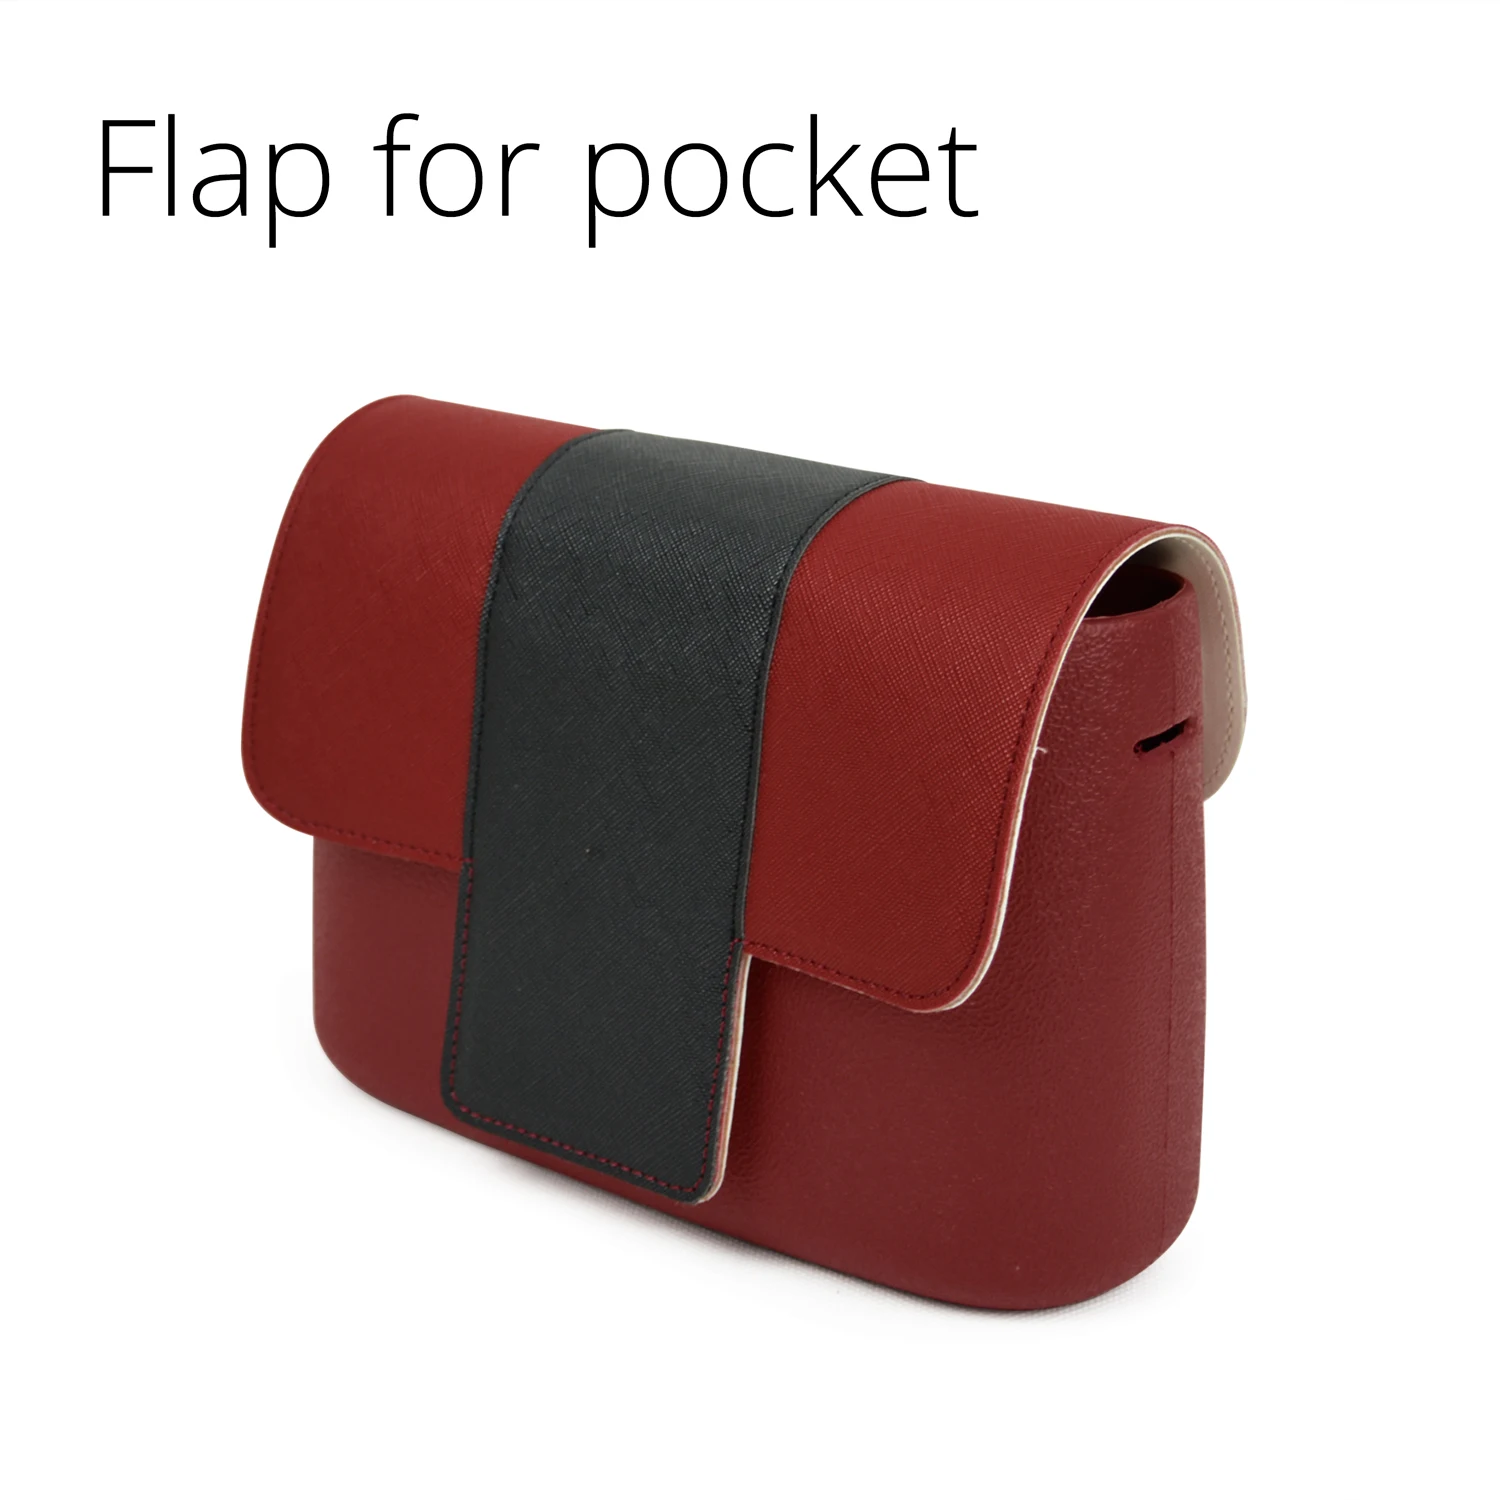 

T-shaped Wood Grain PU Leather Flap Replacement Cover Lid Clam Shell with Magnetic Lock Snap Fastener for Obag O Pocket